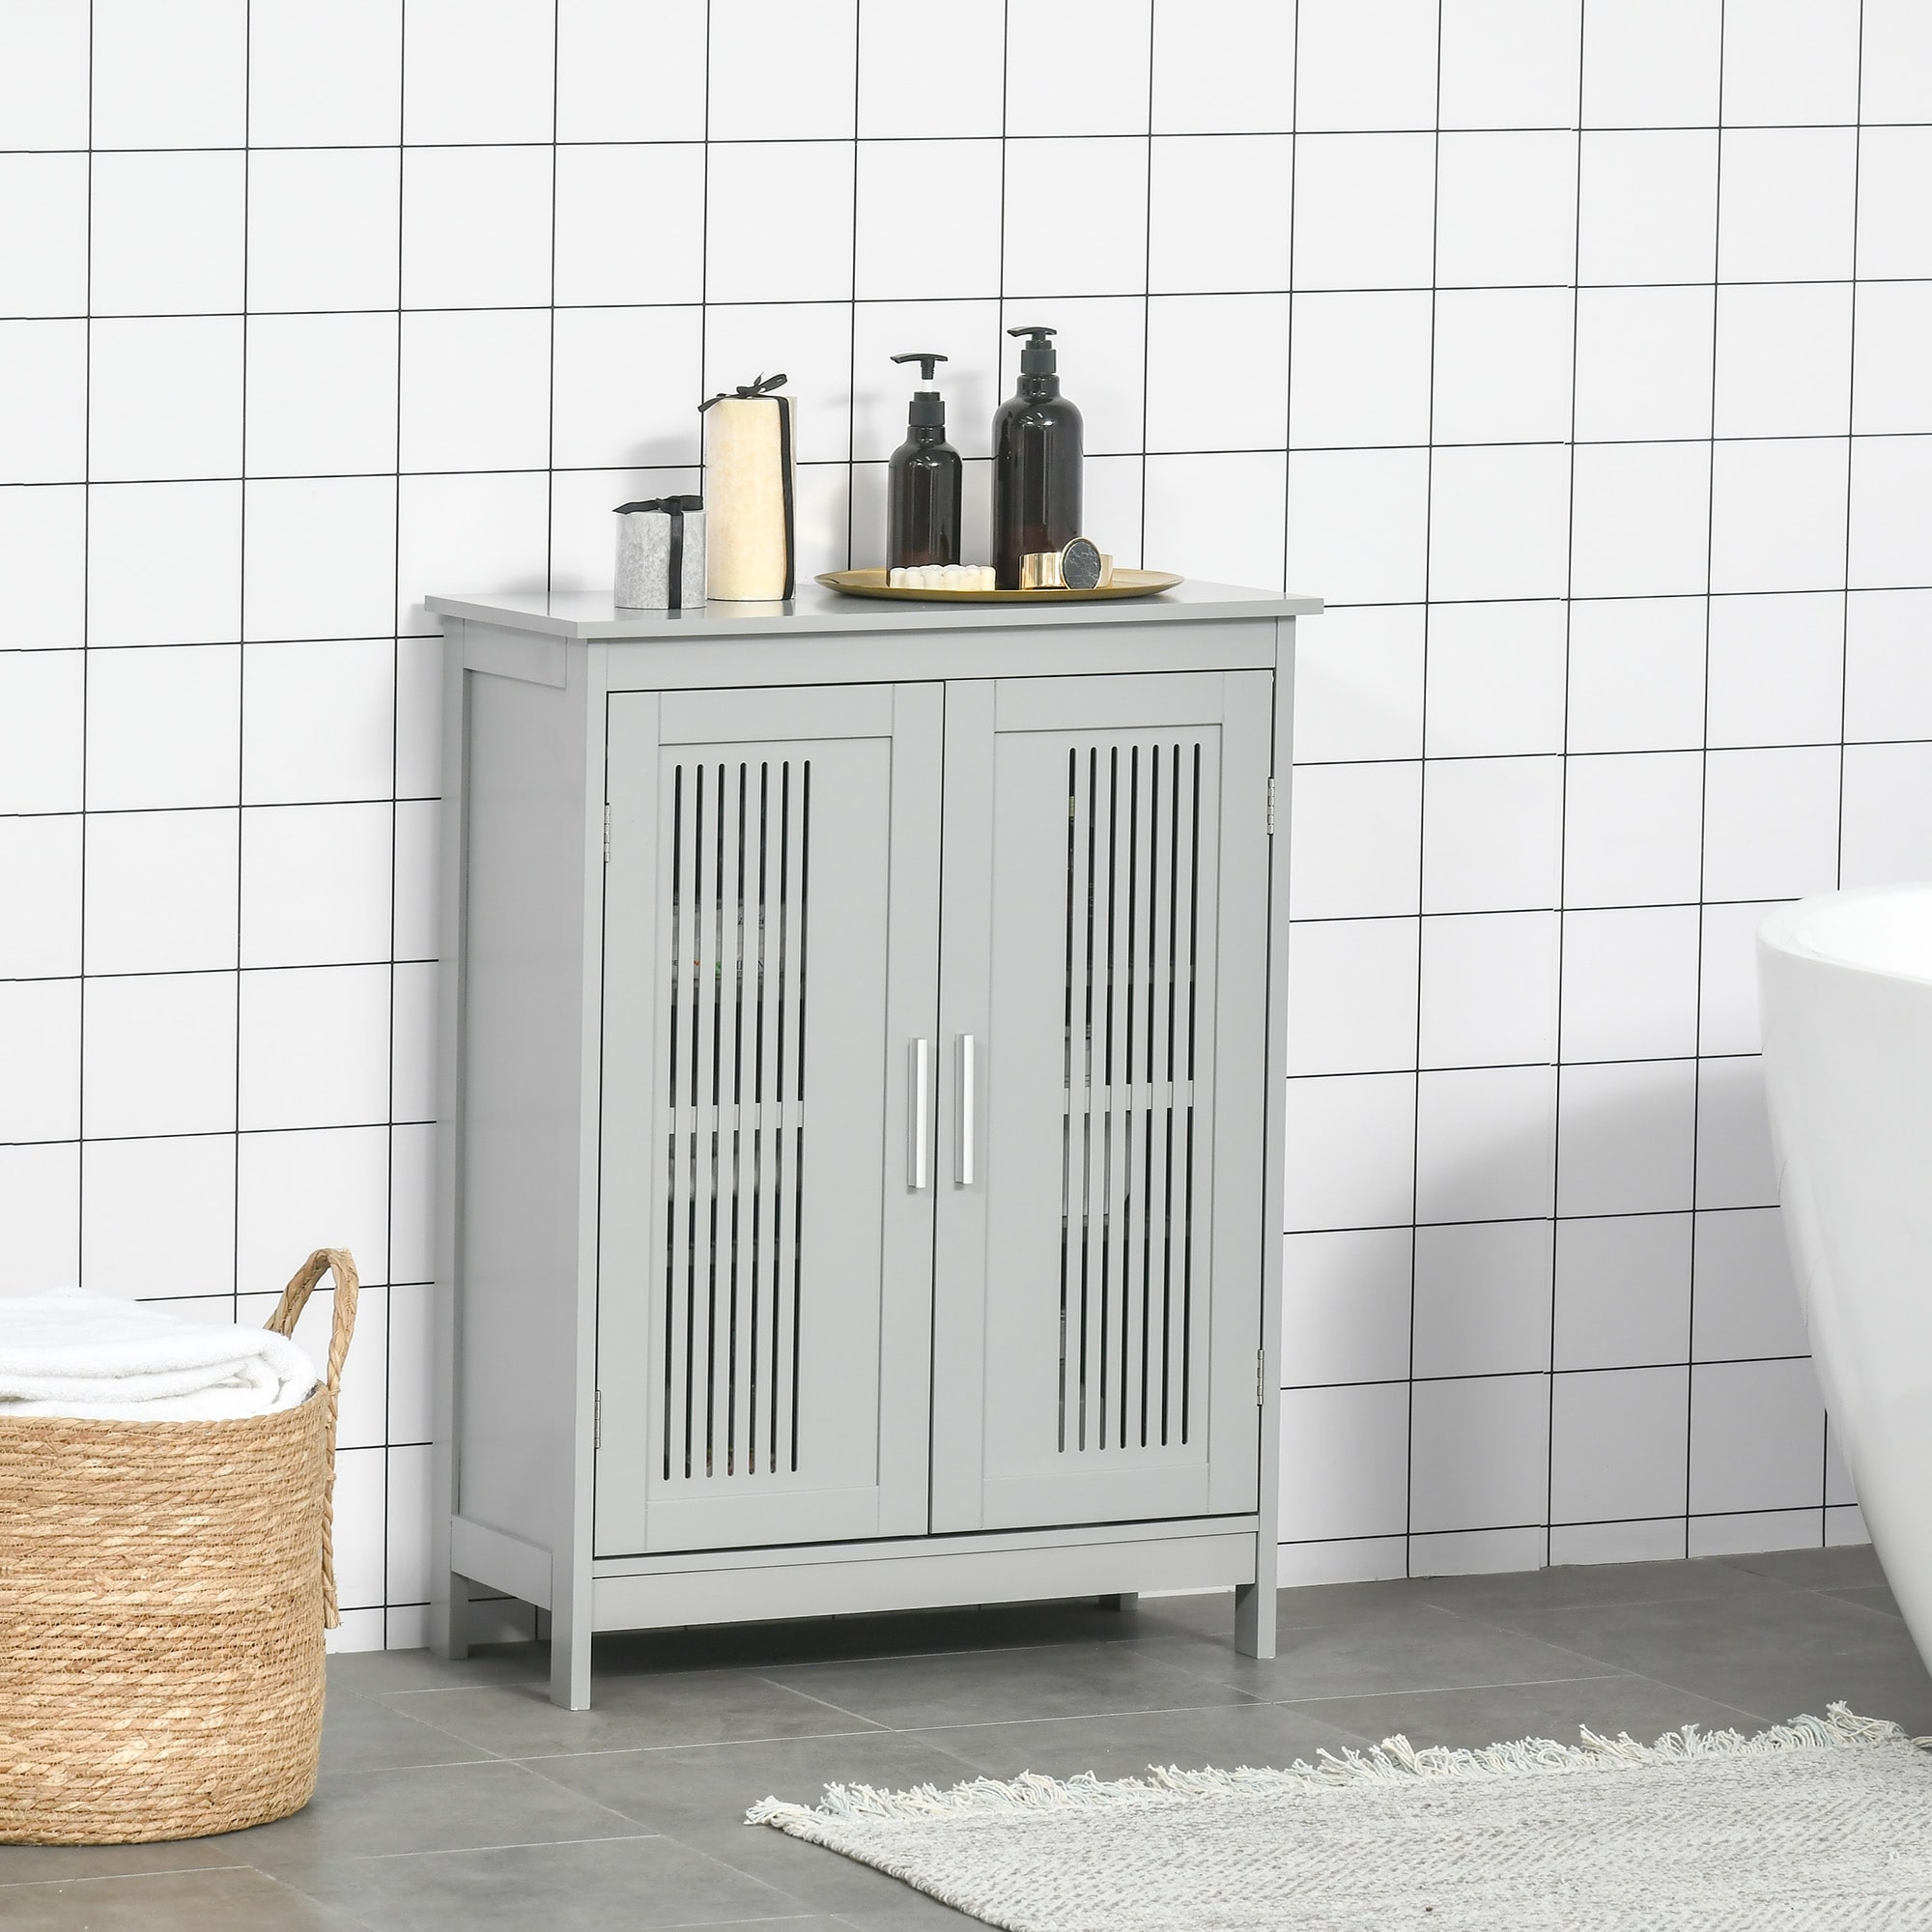 https://ak1.ostkcdn.com/images/products/is/images/direct/d07077e5f304193e973f96114705311c3caa1151/kleankin-Modern-Bathroom-Floor-Cabinet%2C-Free-Standing-Linen-Cabinet%2C-Storage-Cupboard-with-3-Tier-Shelves%2C-Grey.jpg